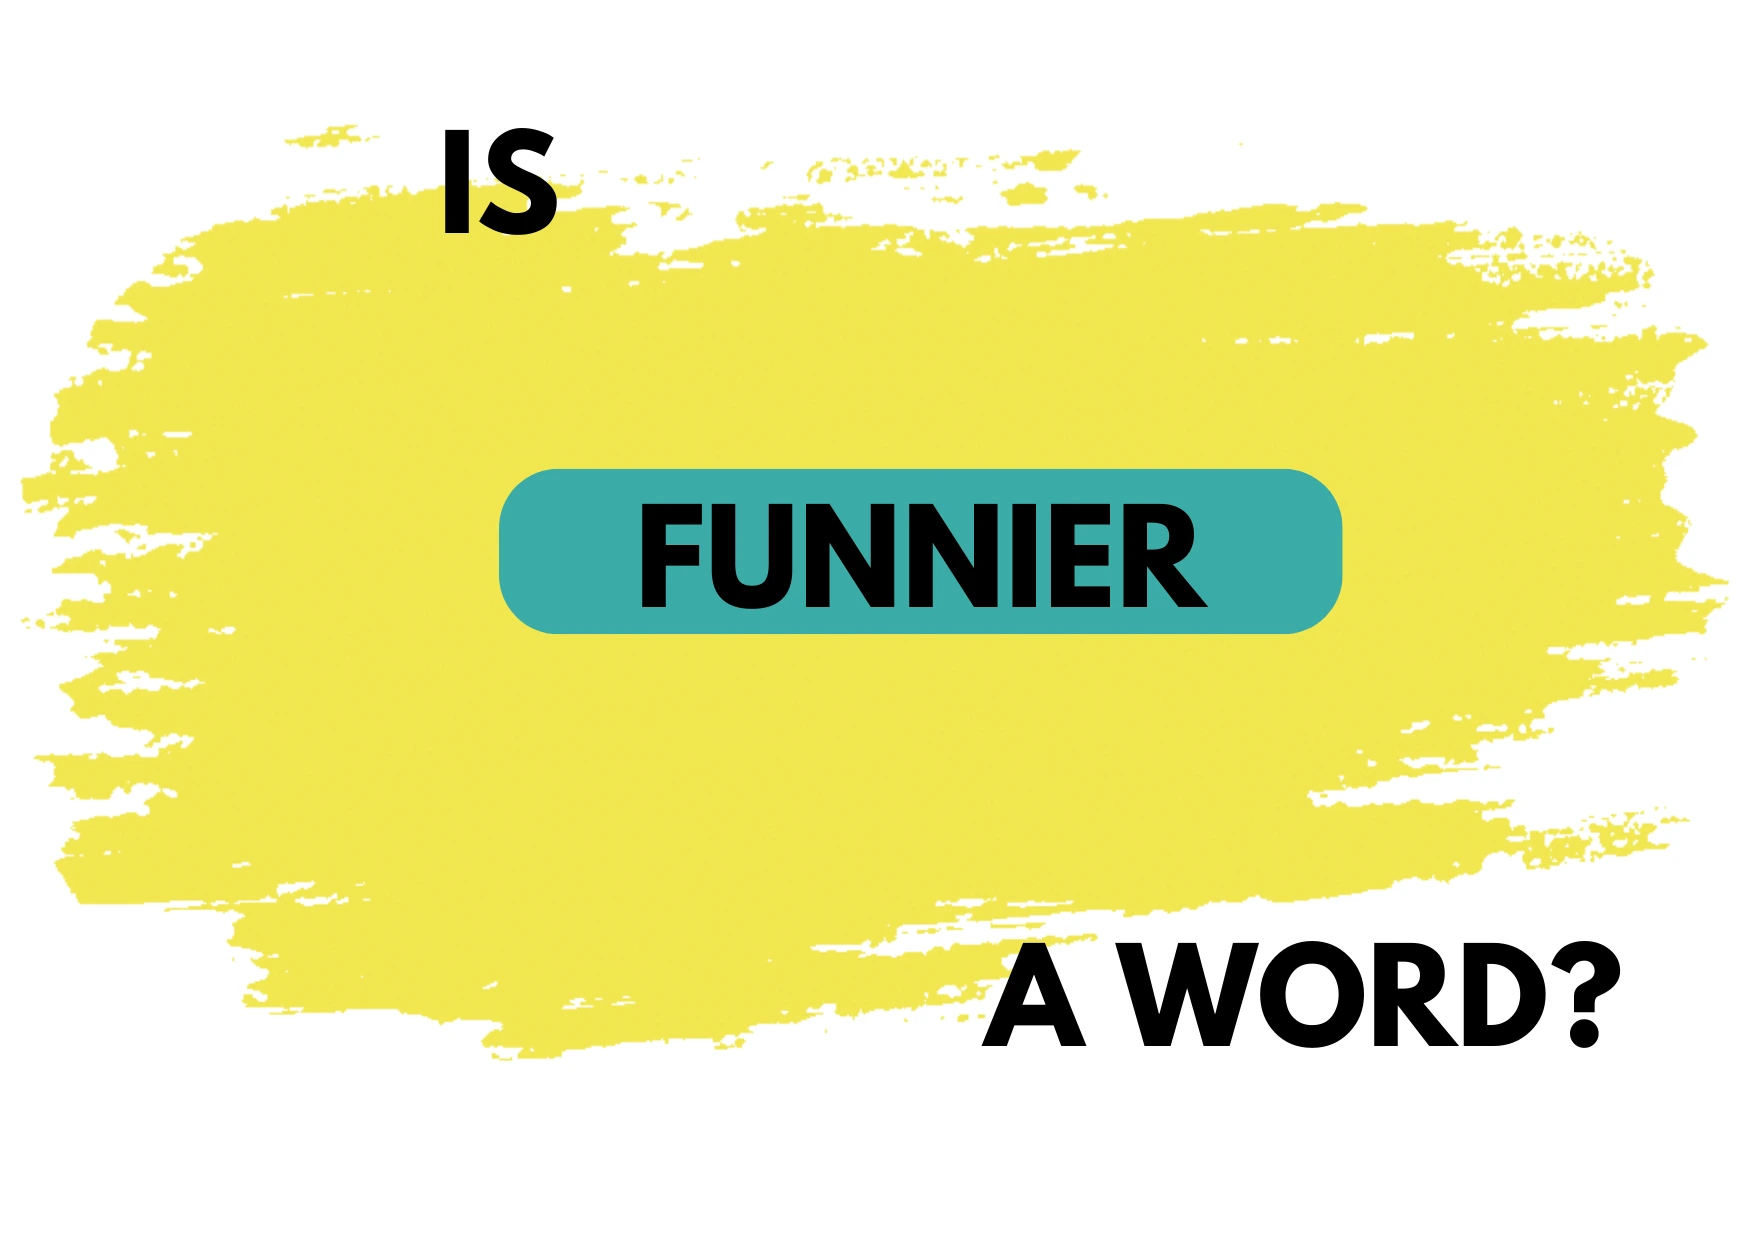 Graphic asking if "Funnier" is a word